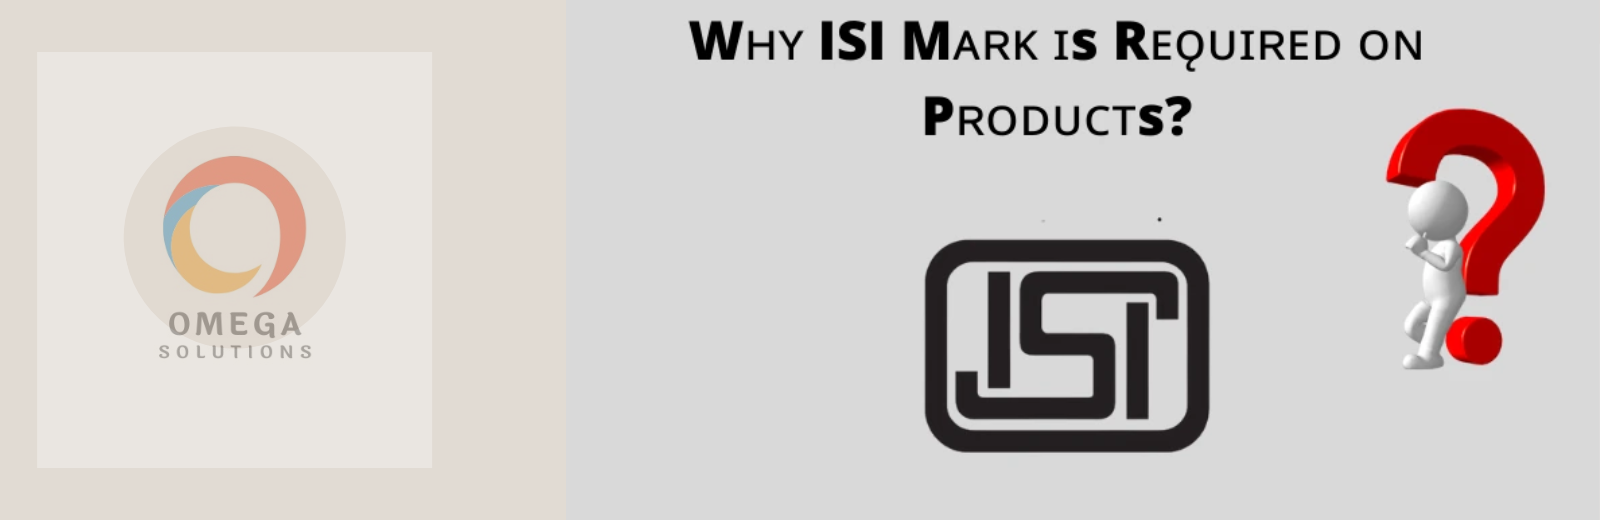 ISI mark is just a sticker...